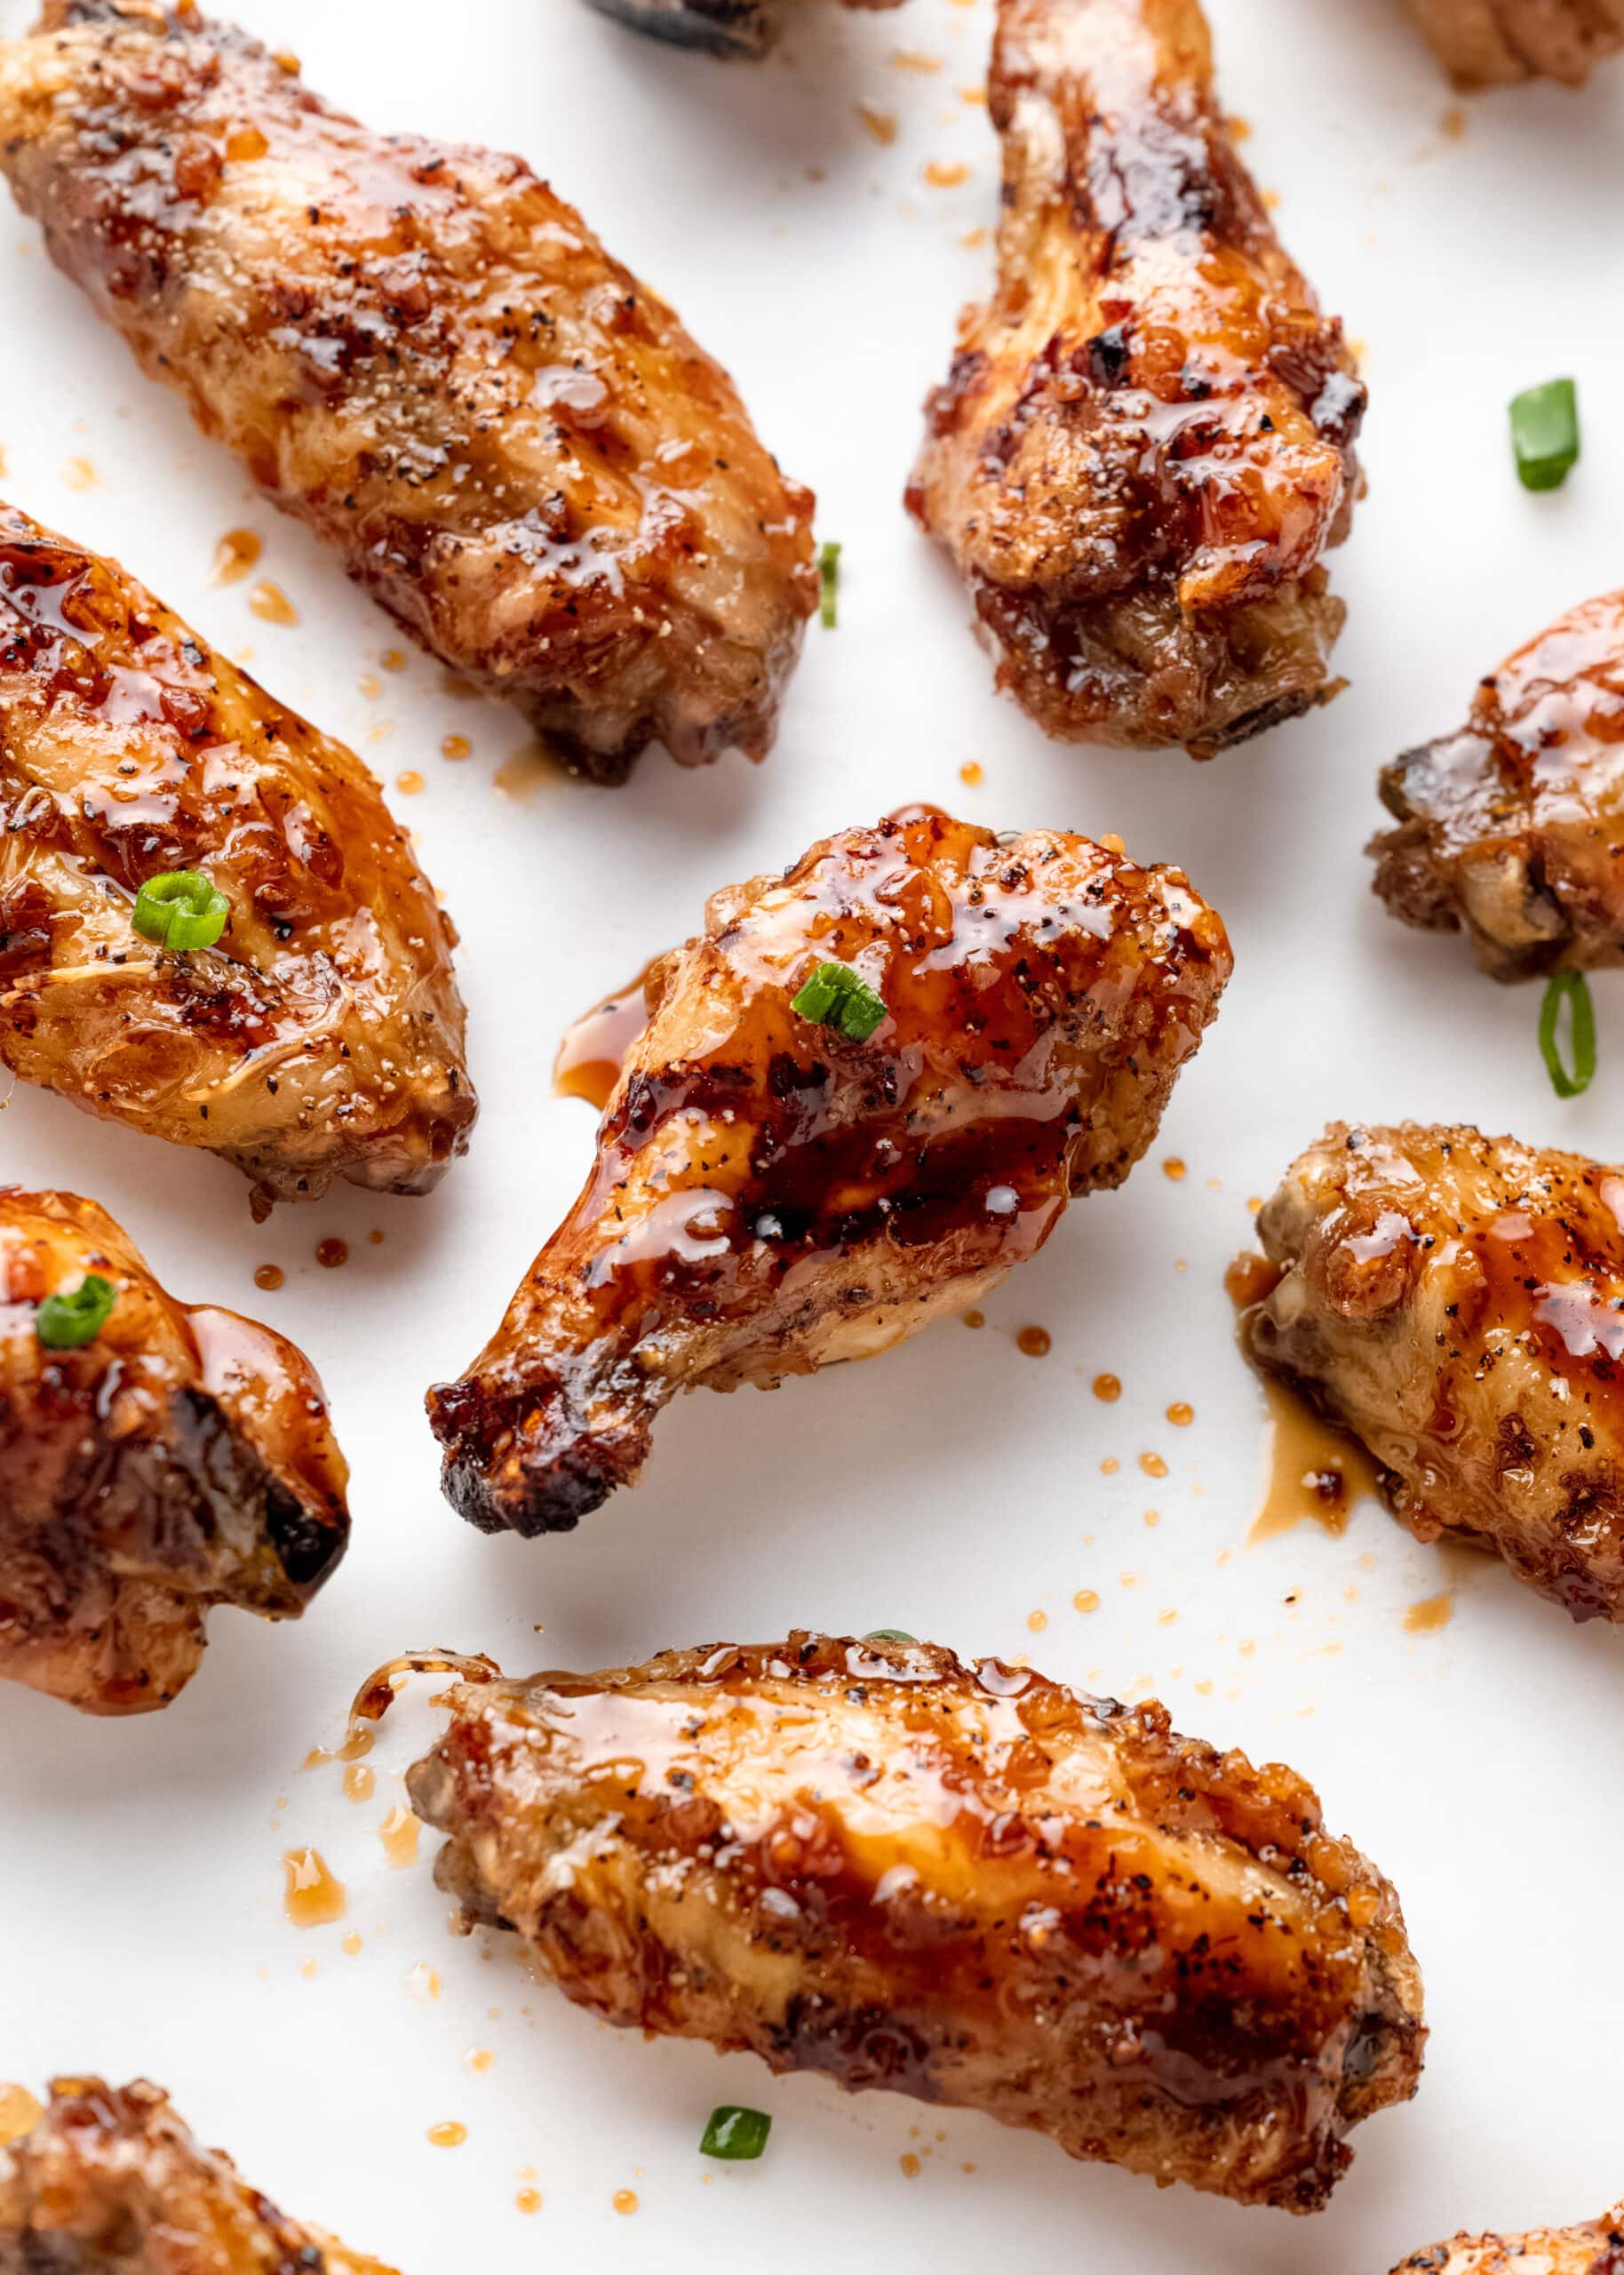 Honey garlic baked chicken wings with pieces of green onions.